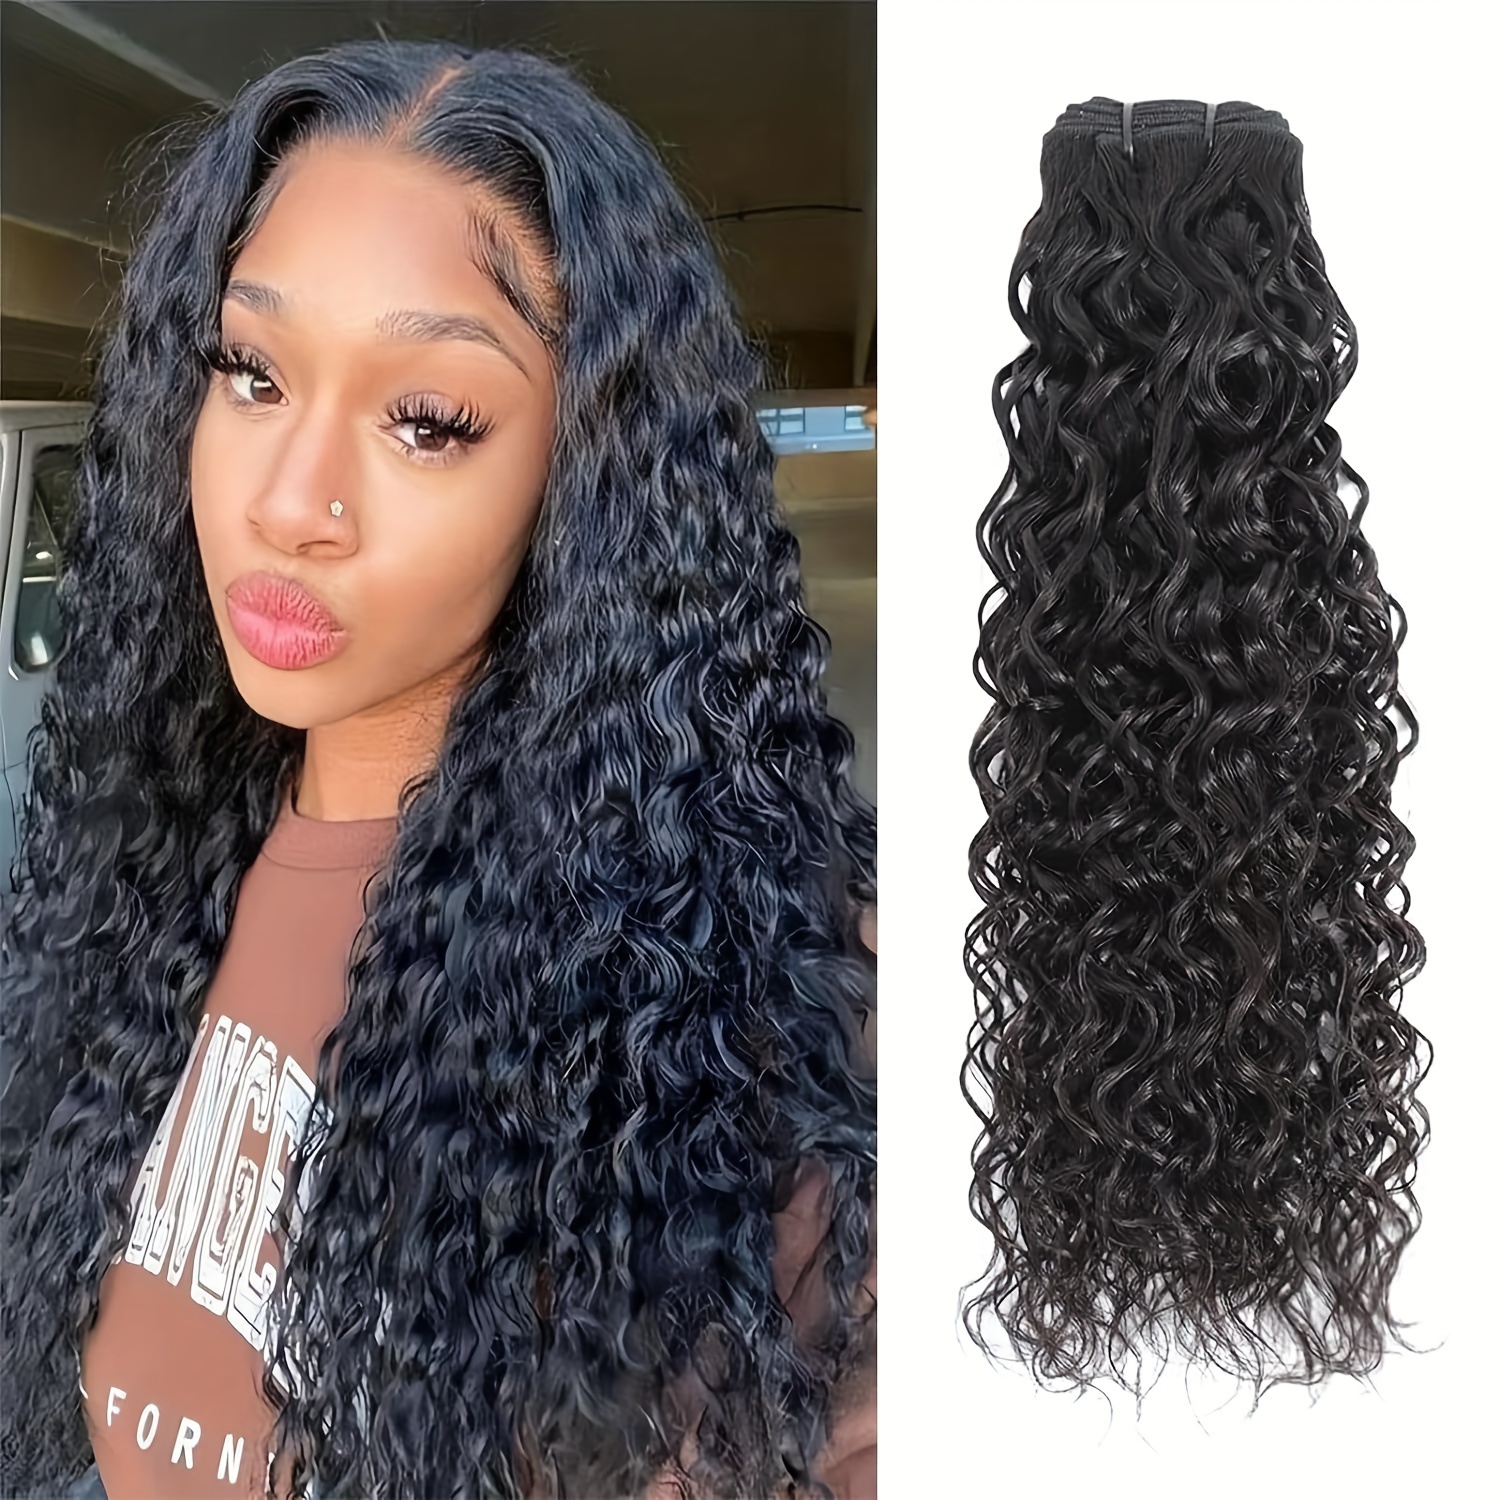 

Water Wave Bundle Human Hair 1 Bundle Unprocessed Human Hair Extension Water Curly Hair Weave Natural Color 14-32 Inch